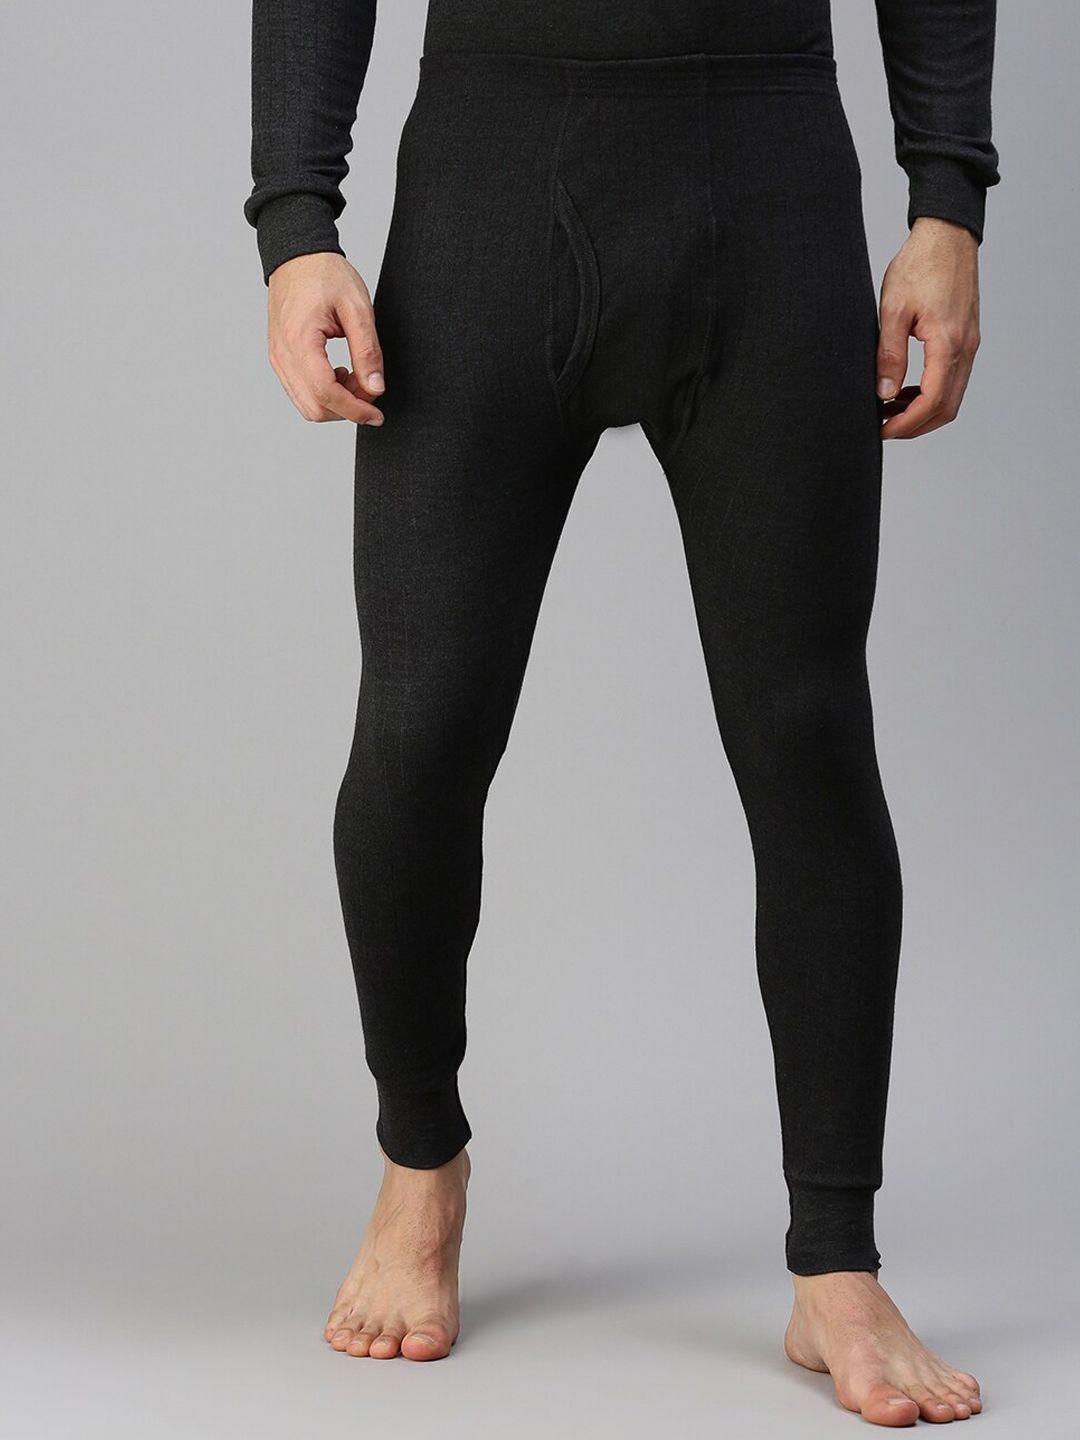 lux-cottswool-men-black-solid-cotton-thermal-bottom